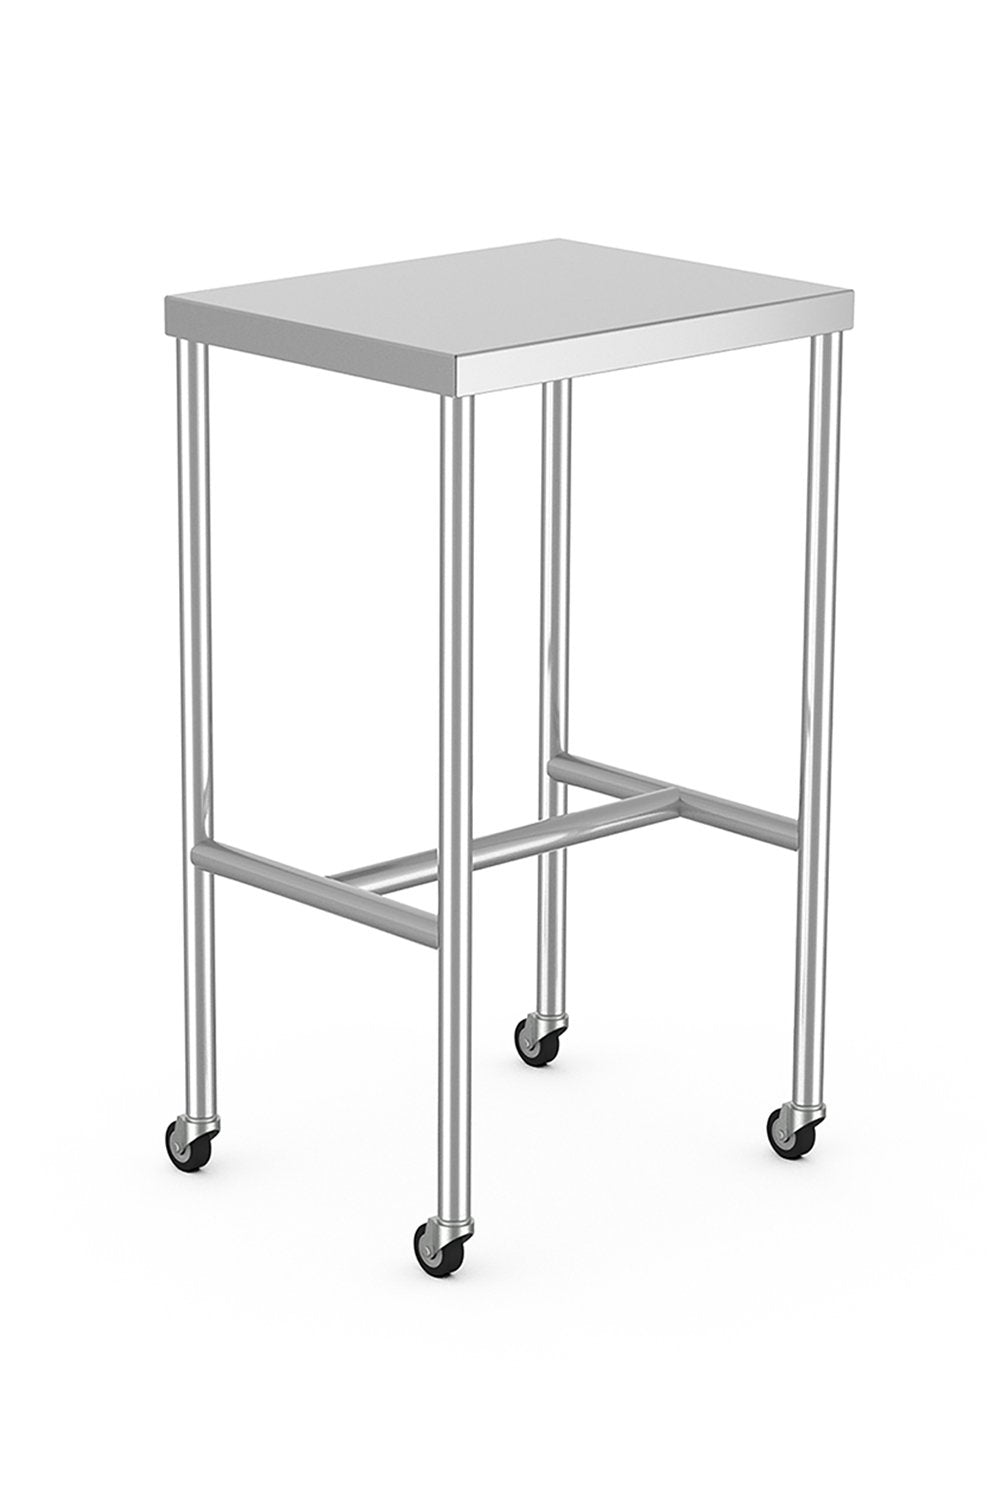 Stainless Steel Table Stainless Solutions Macmedical 16"D x 20"W x 34"H Under-shelf 